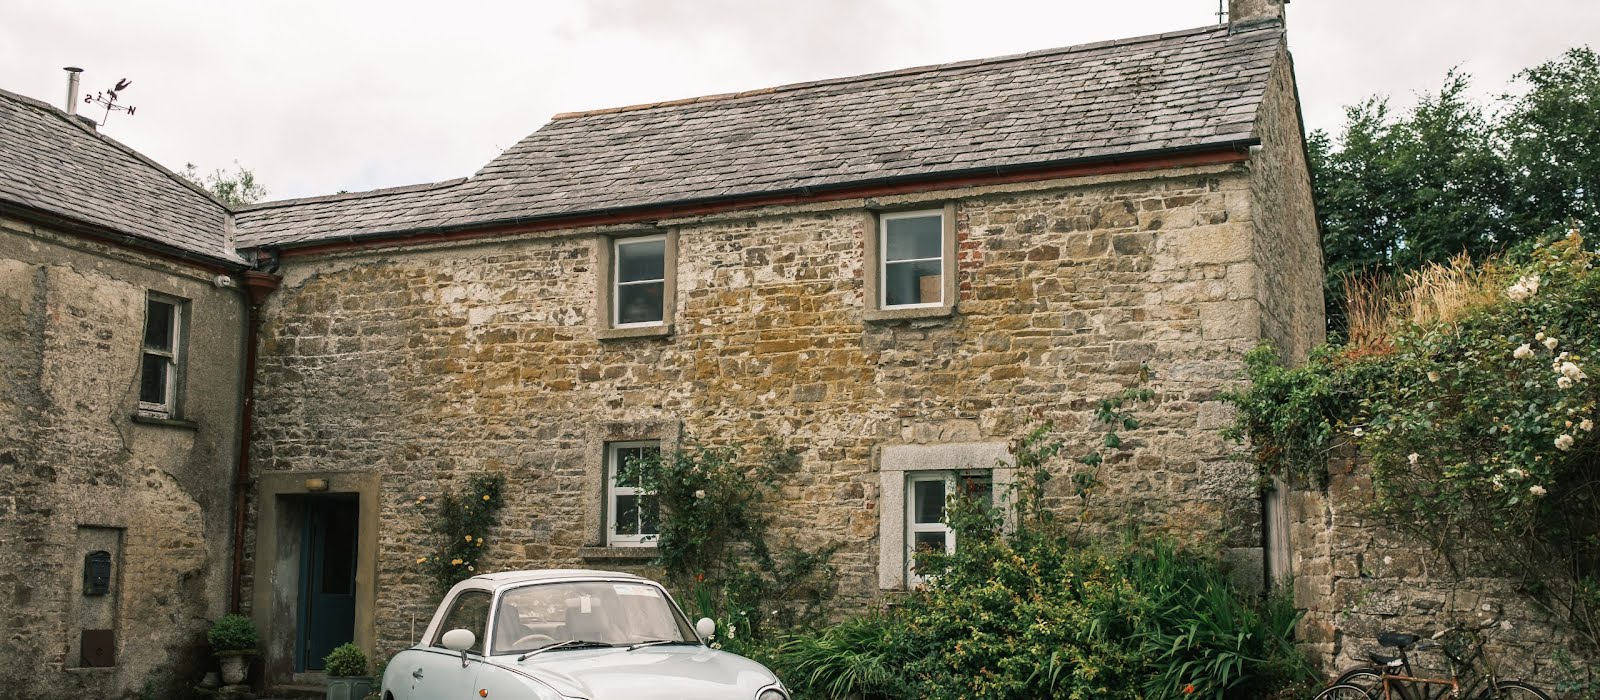 Take a tour of Joy Thorpe’s Kilkenny cottage full of antique finds